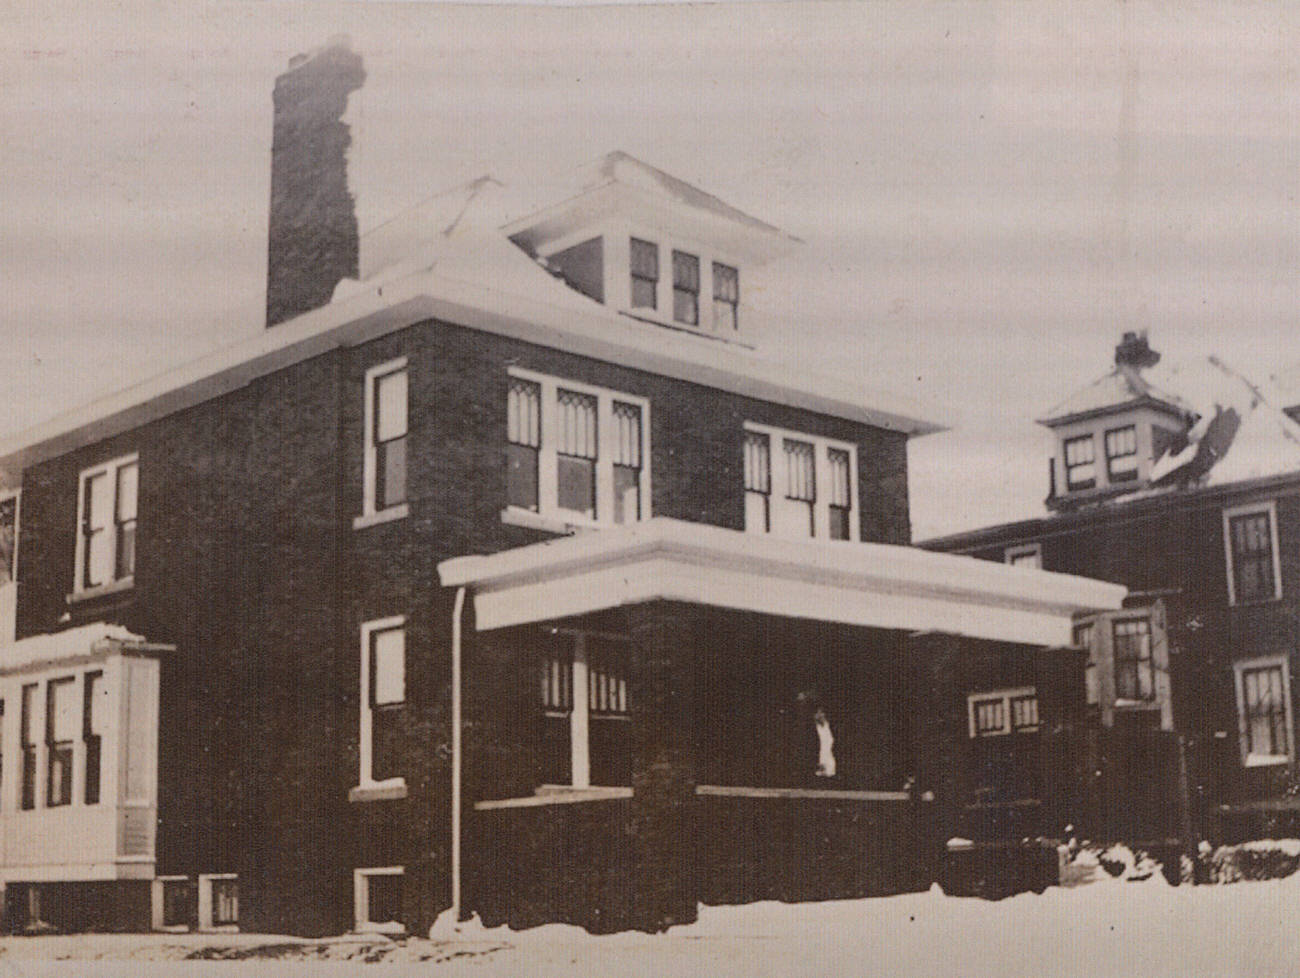 The Frank H. Gorrell family home at 40 Brevoort Road in Clintonville, Columbus, Ohio, winter of 1916.